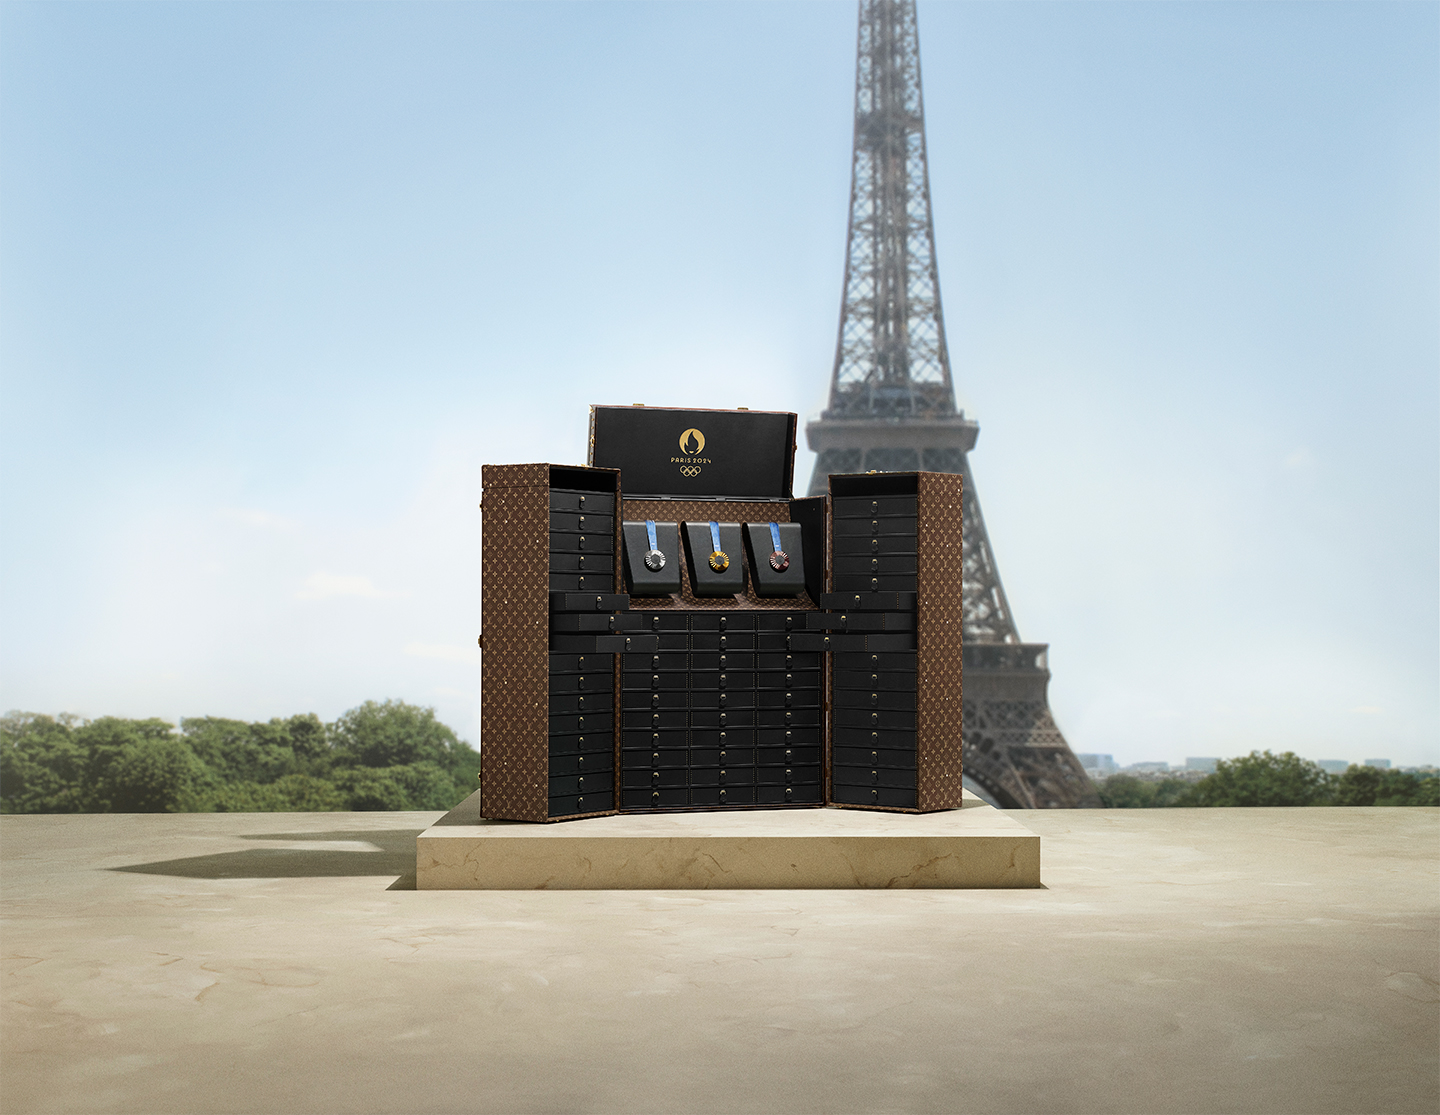 Louis Vuitton presented the Medals Trunks and Torches Trunks, special trunks created for the upcoming Olympic and Paralympic Games, as part of LVMH's Premium Partnership with Paris 2024. Photo courtesy of Louis Vuitton